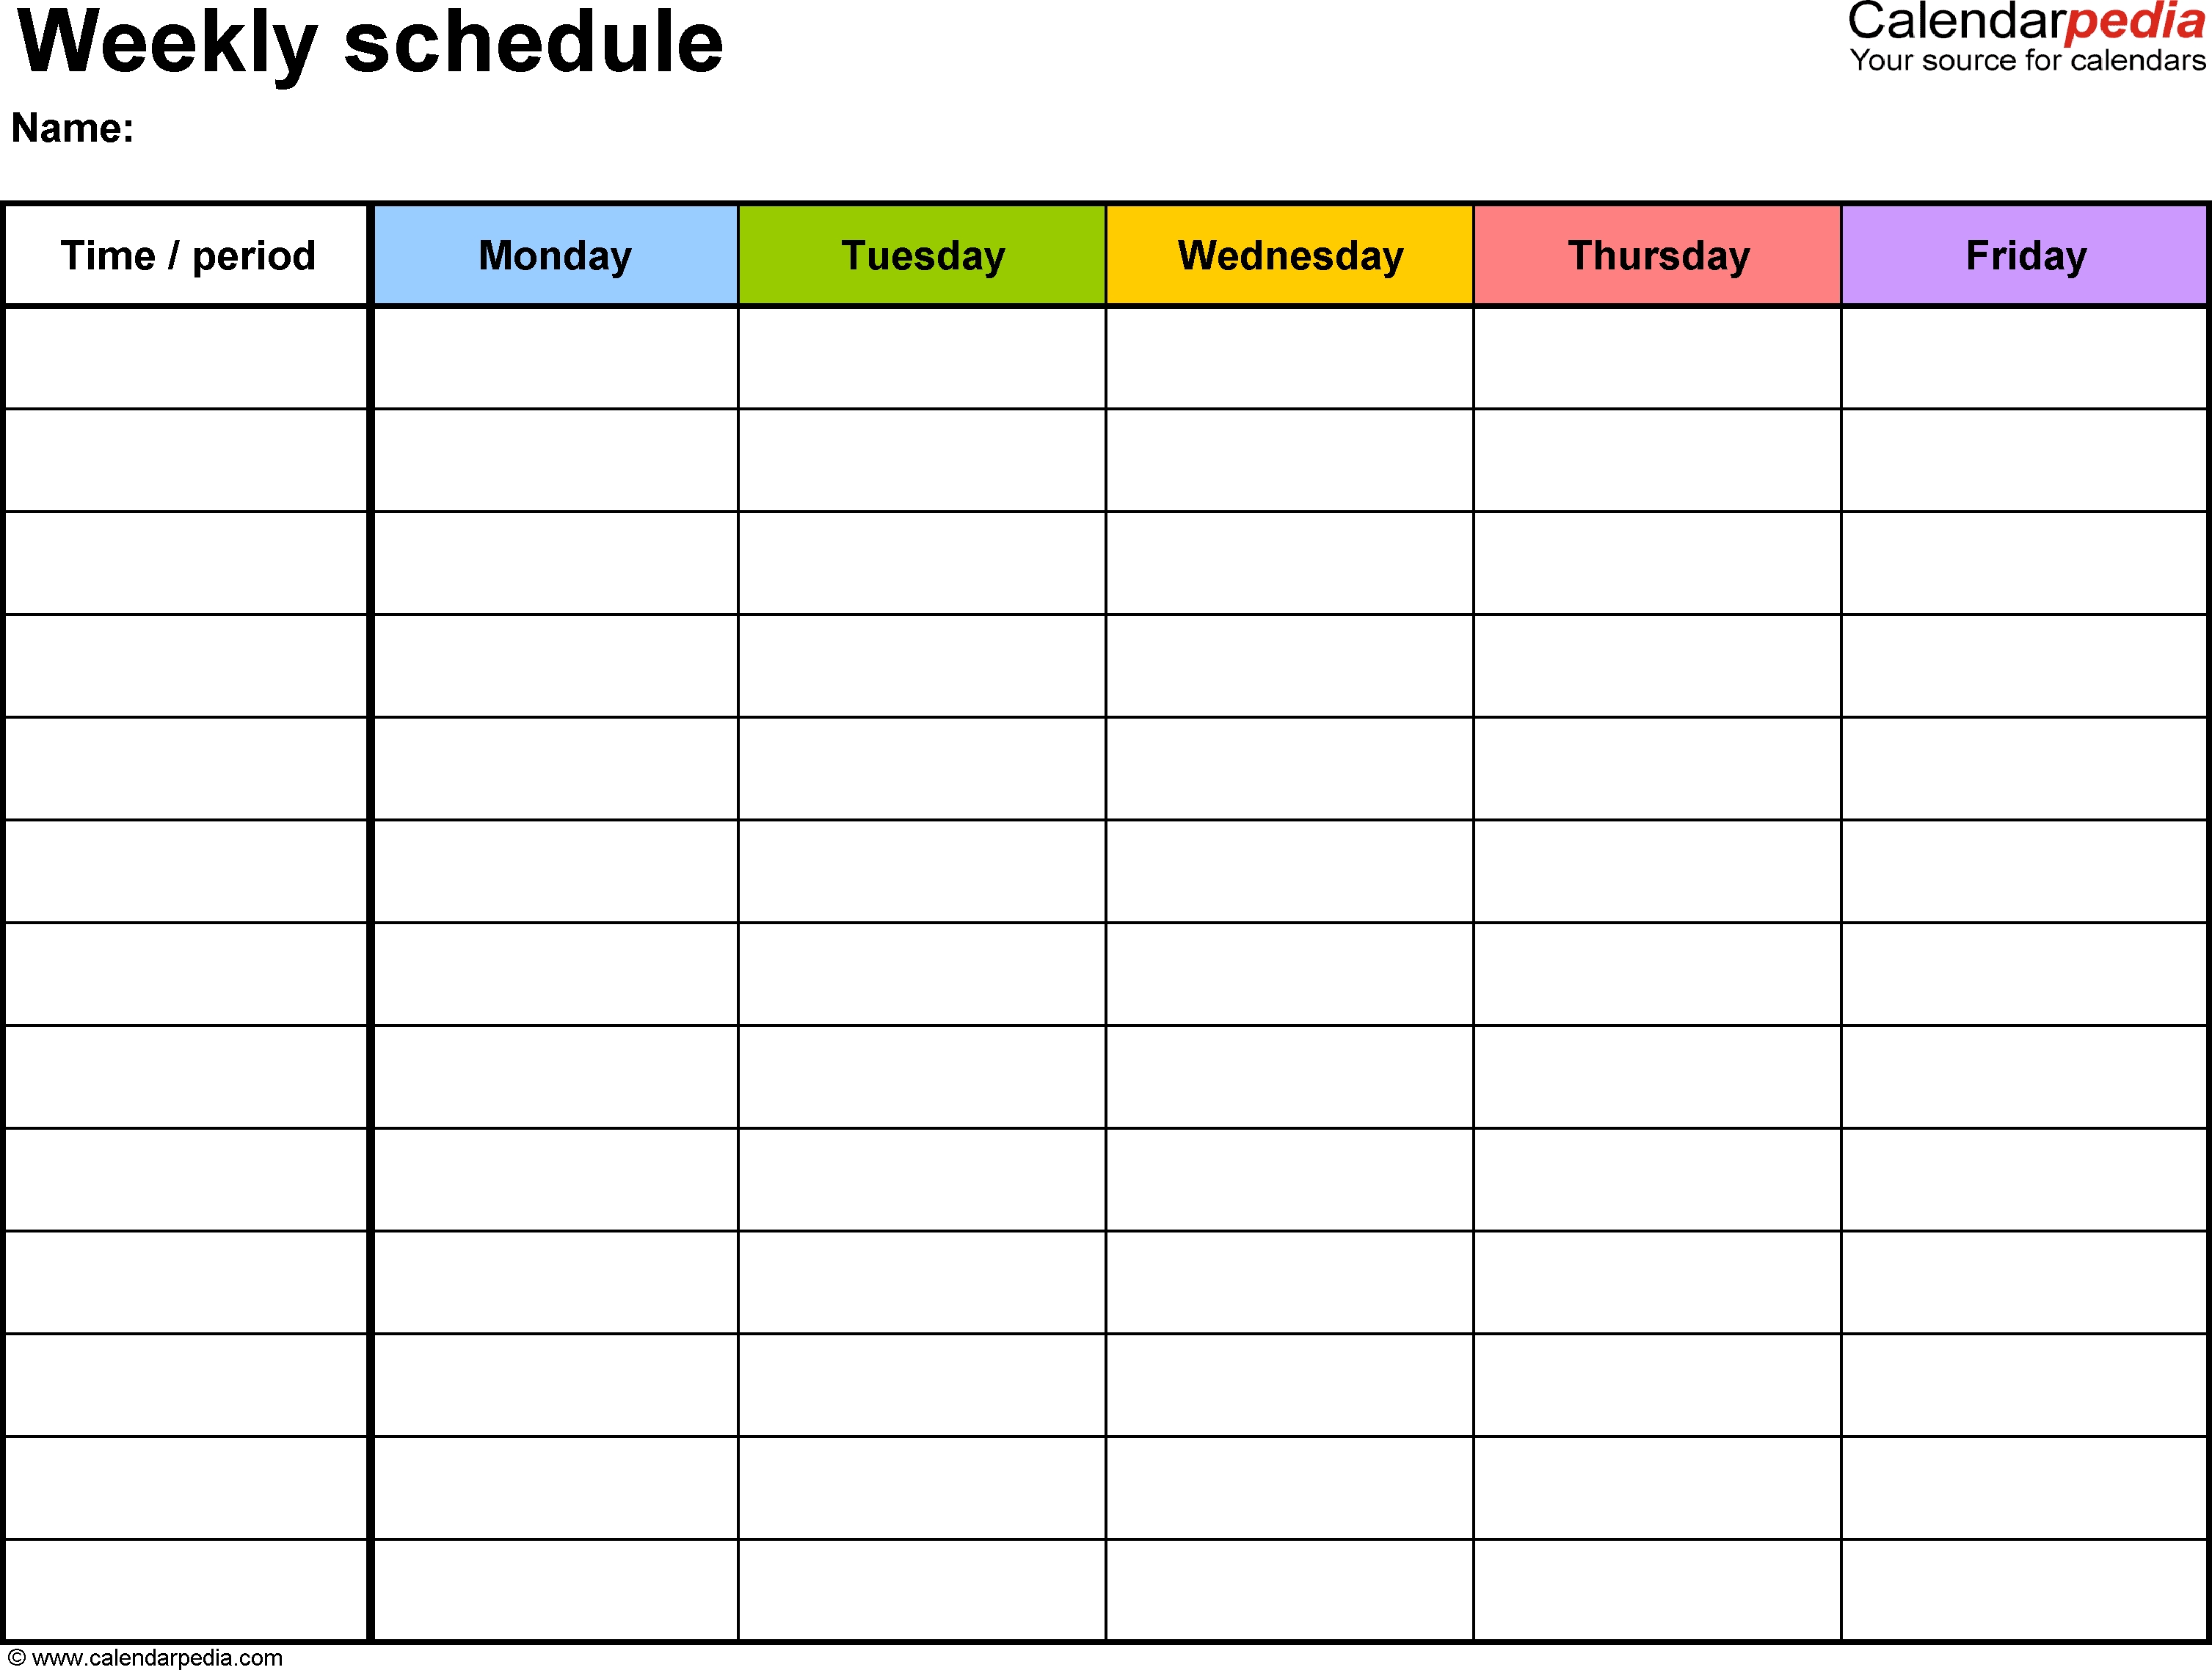 Free Weekly Schedule Templates For Excel - 18 Templates pertaining to Blank Excel Spreadsheet With Calendar